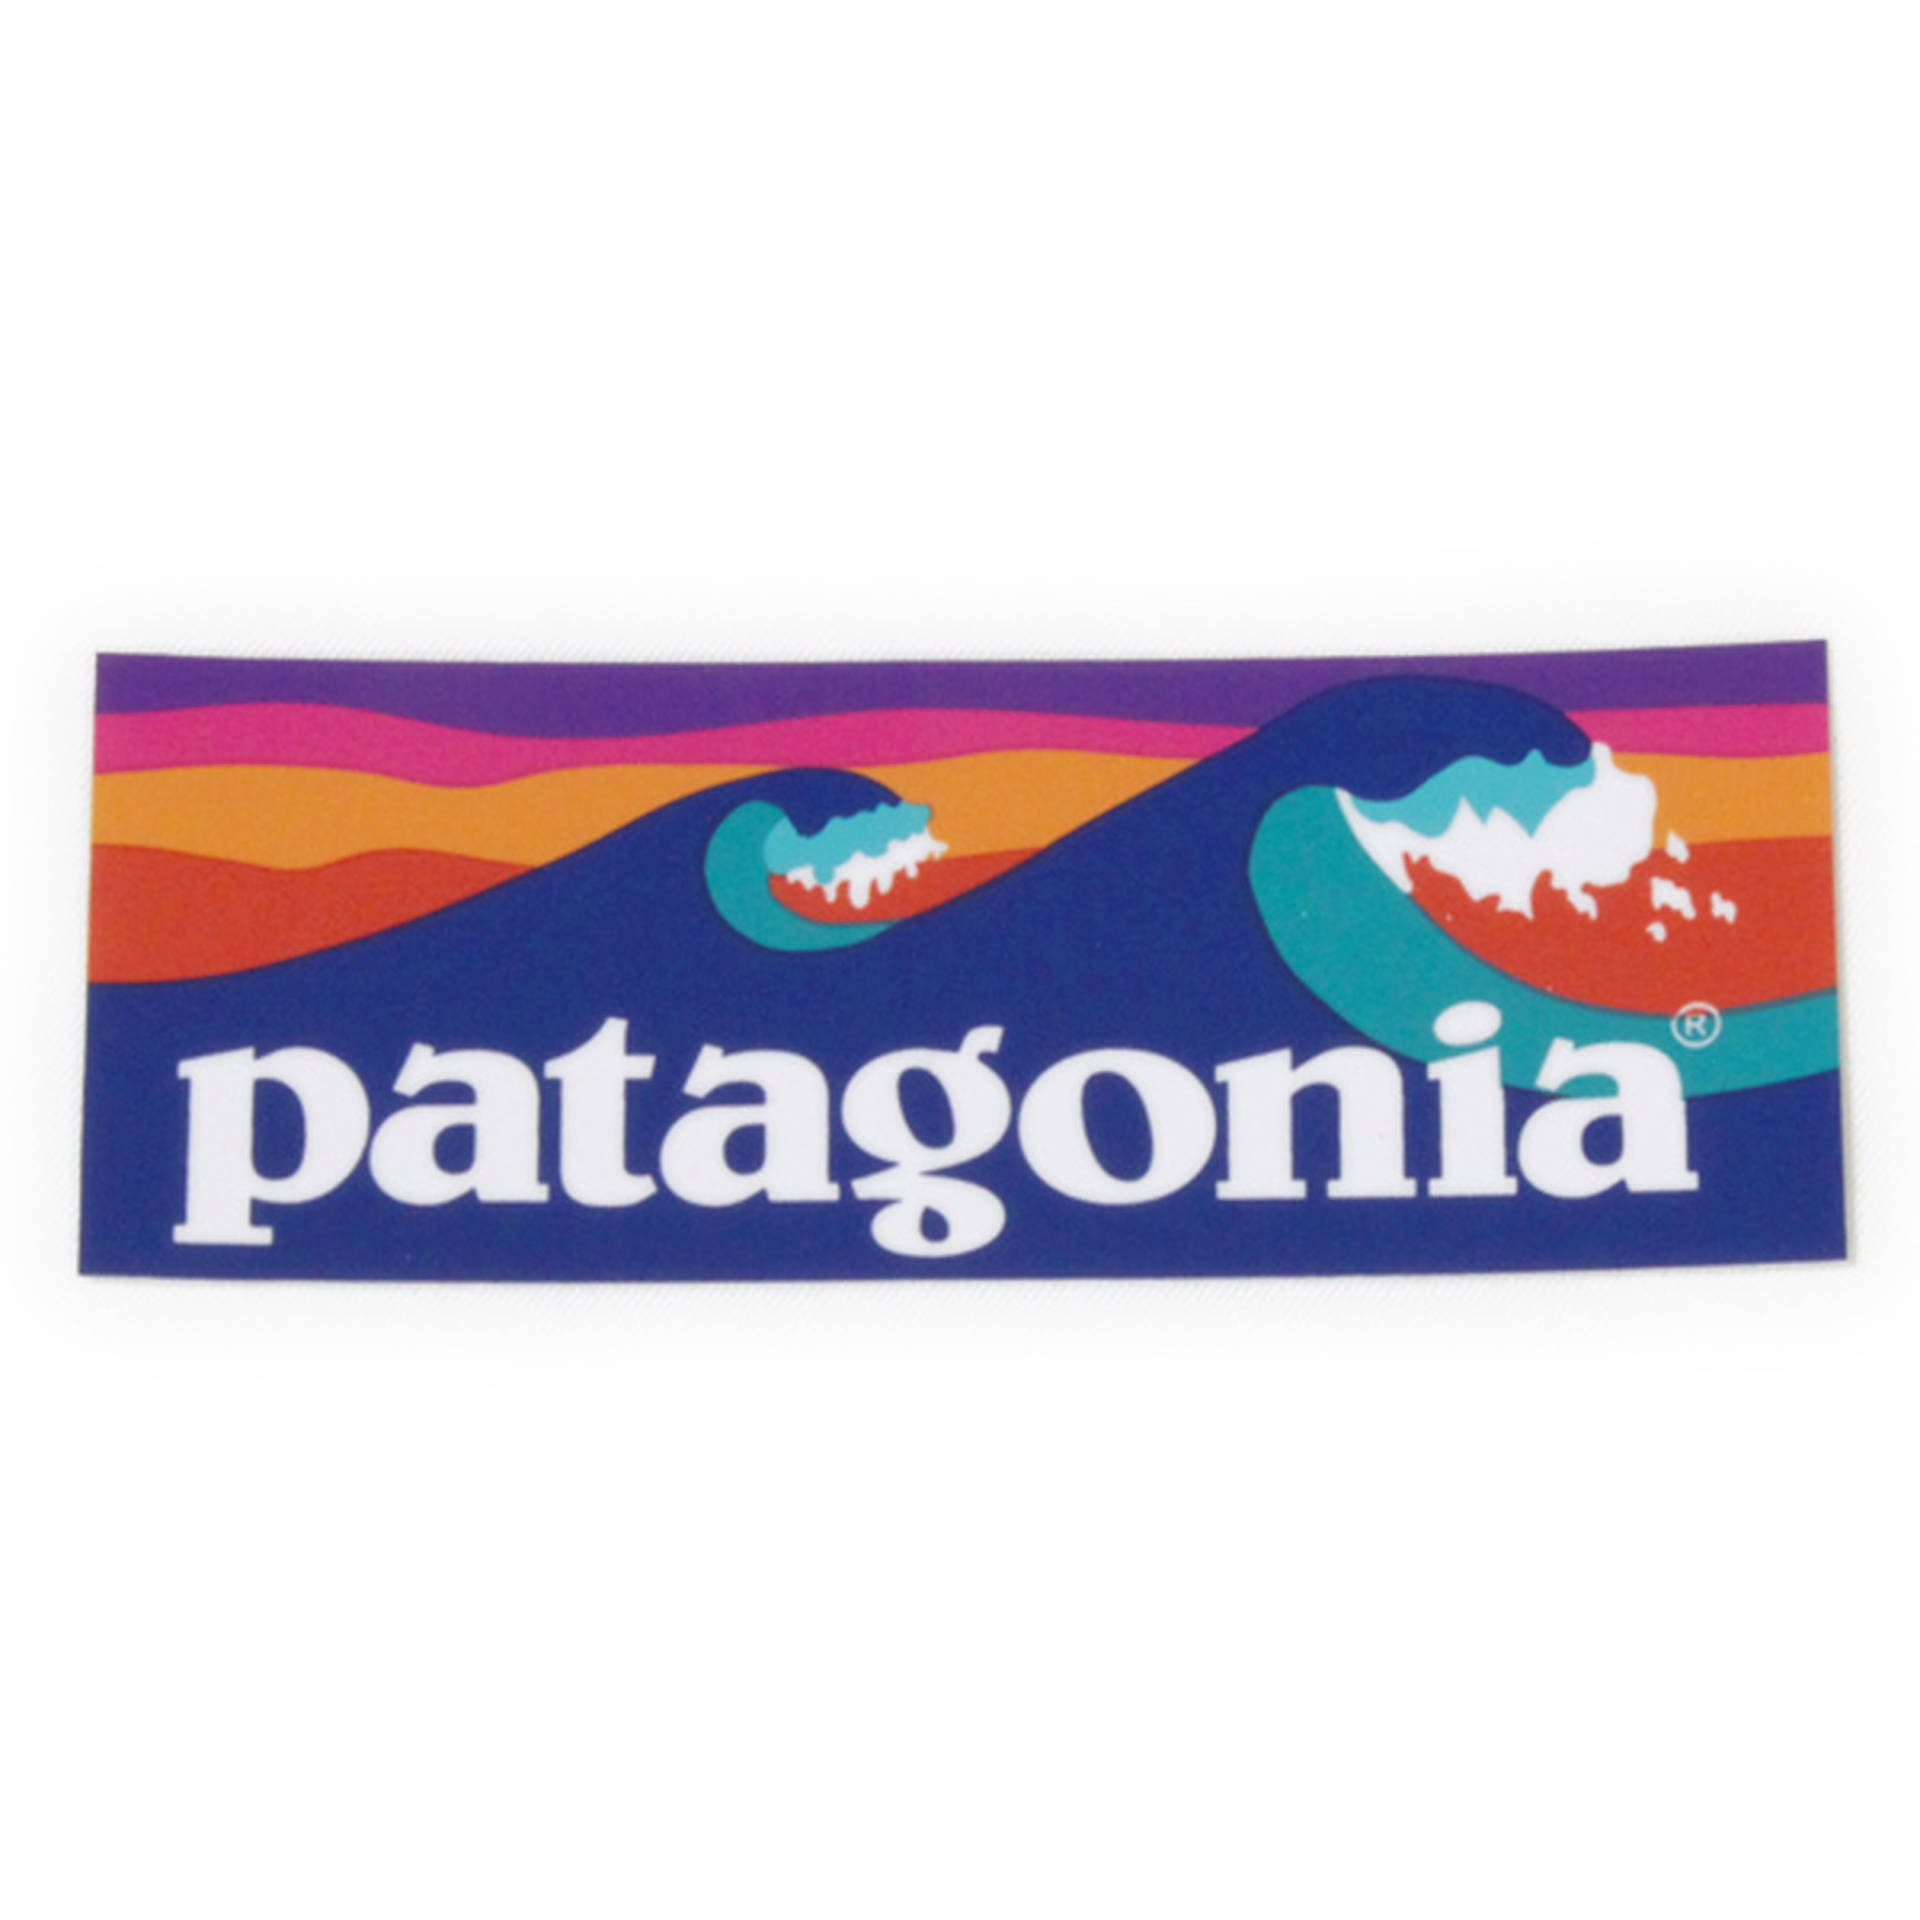 The Iconic Patagonia Logo Over Stunning Mountain Backdrop Background